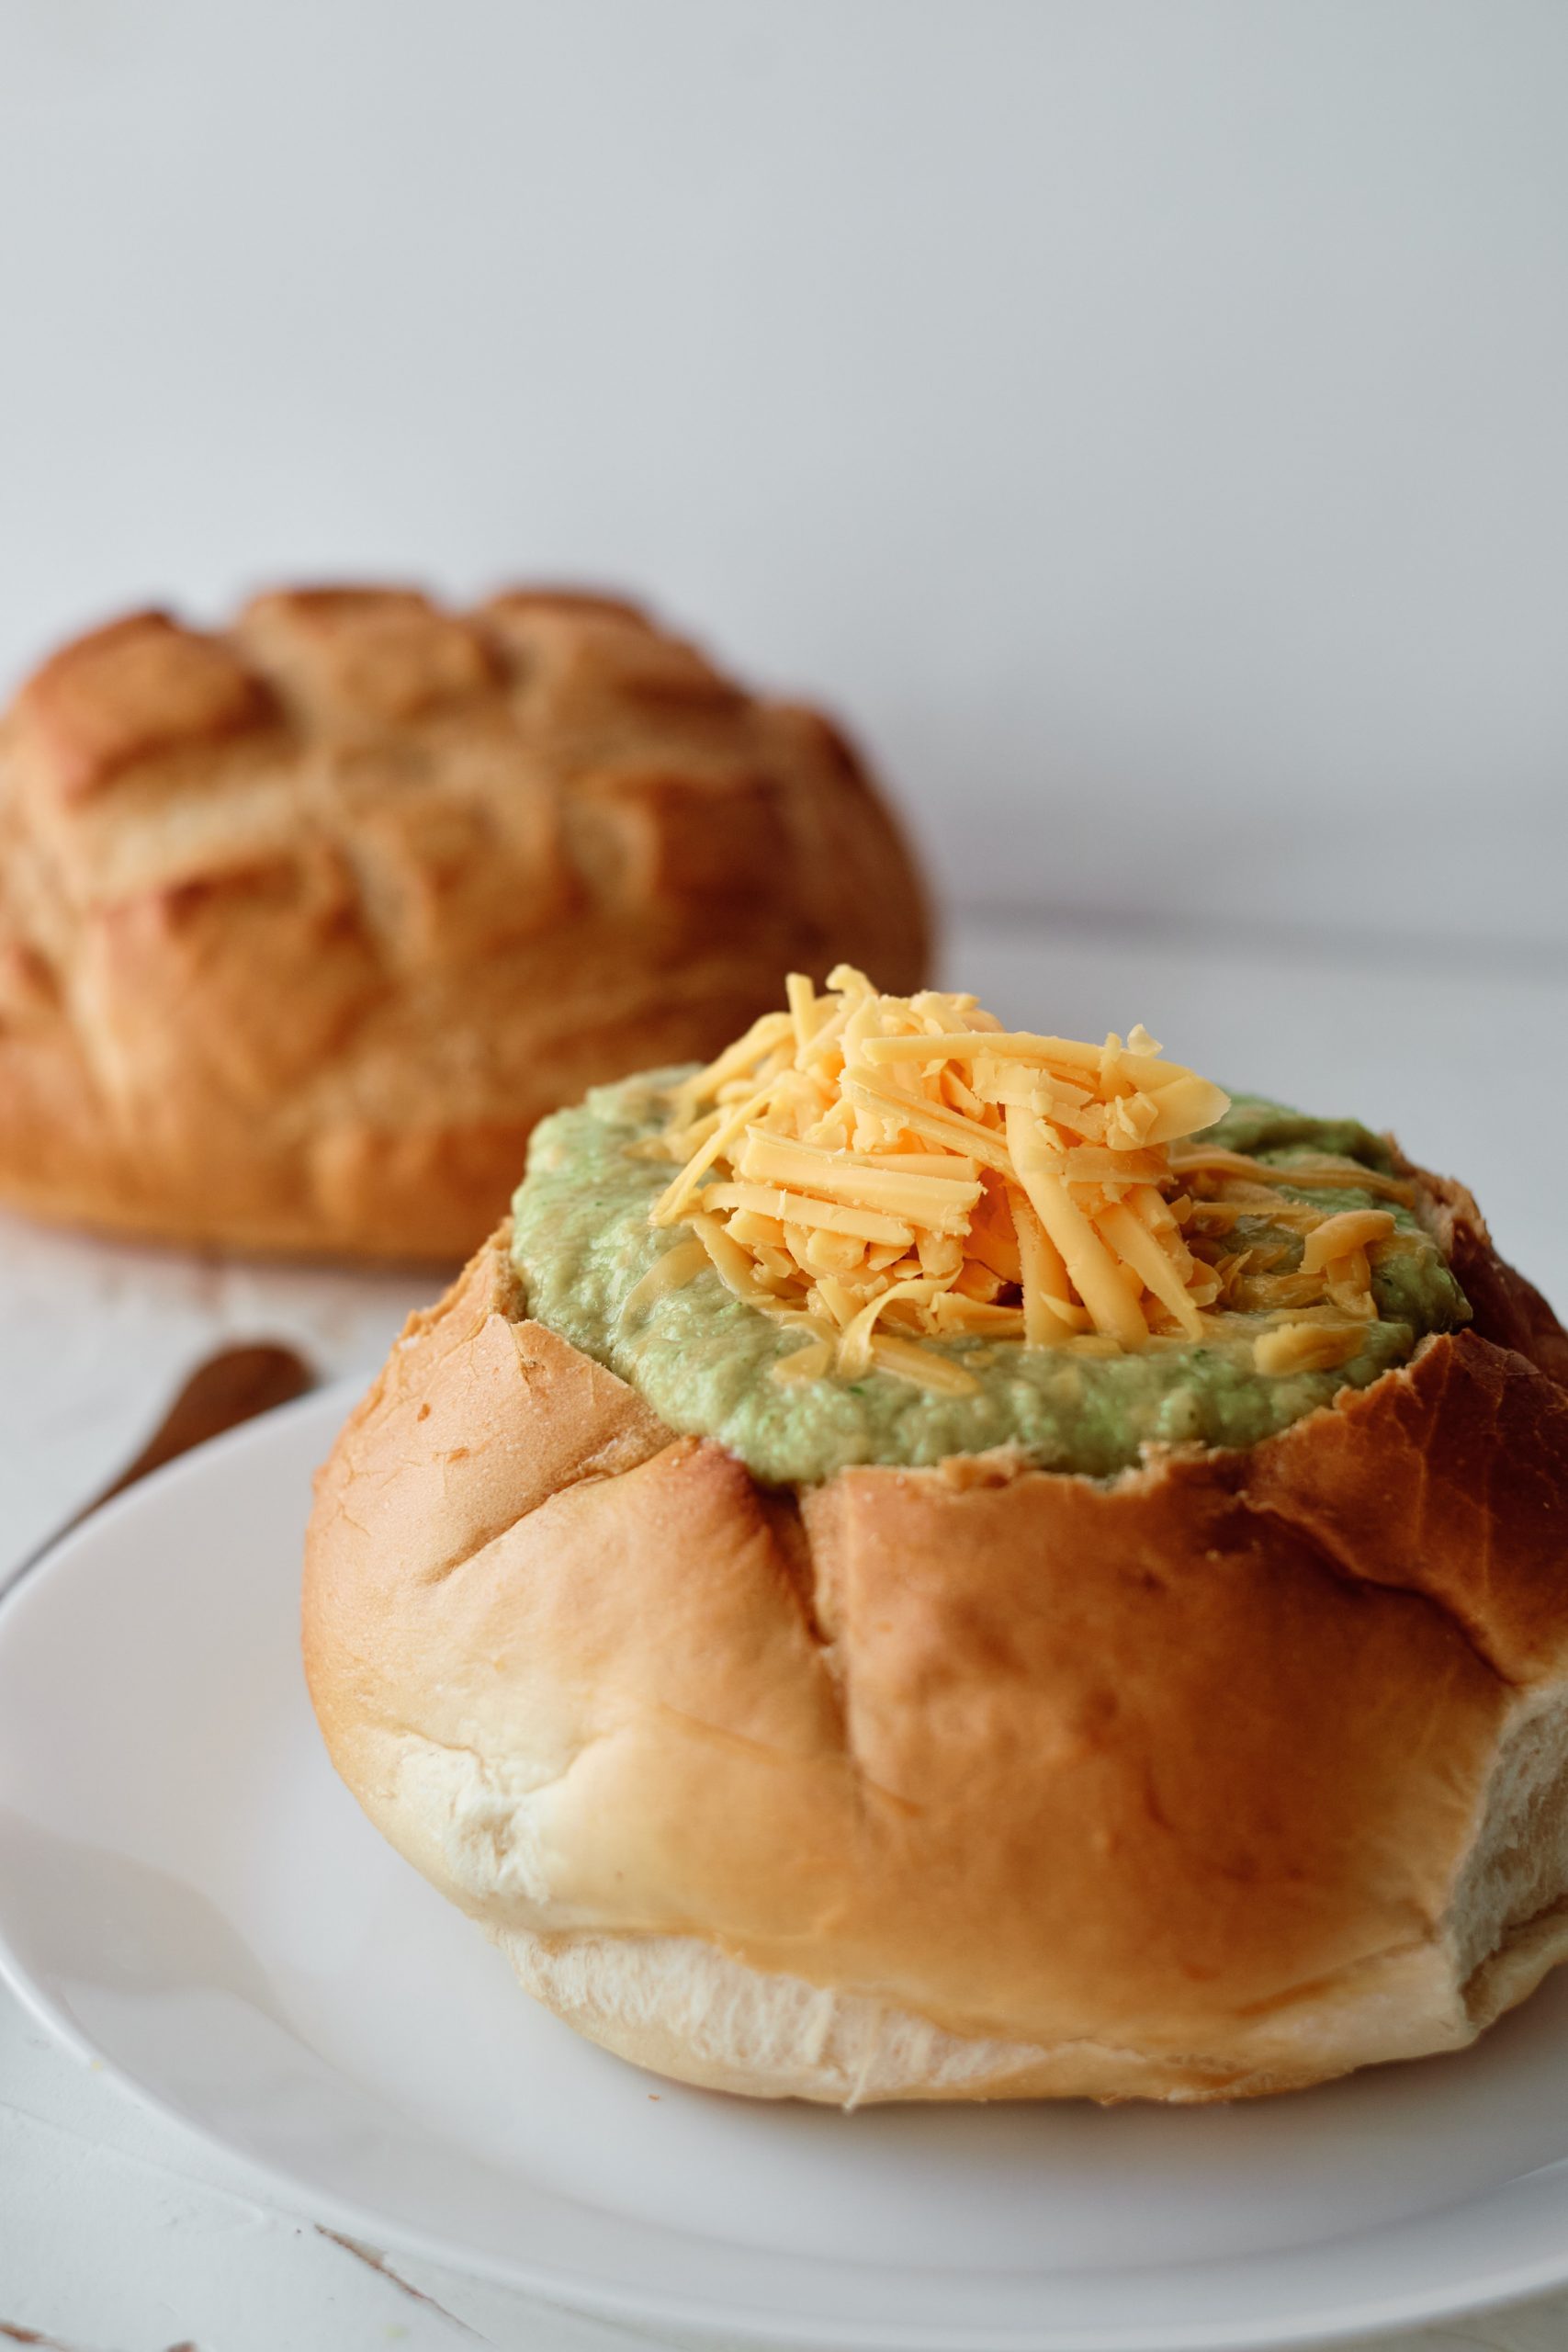 A bread bowl sitting on a white plate filled with soup topped with shredded cheddar cheese. A second loaf of bread is sitting in the background.